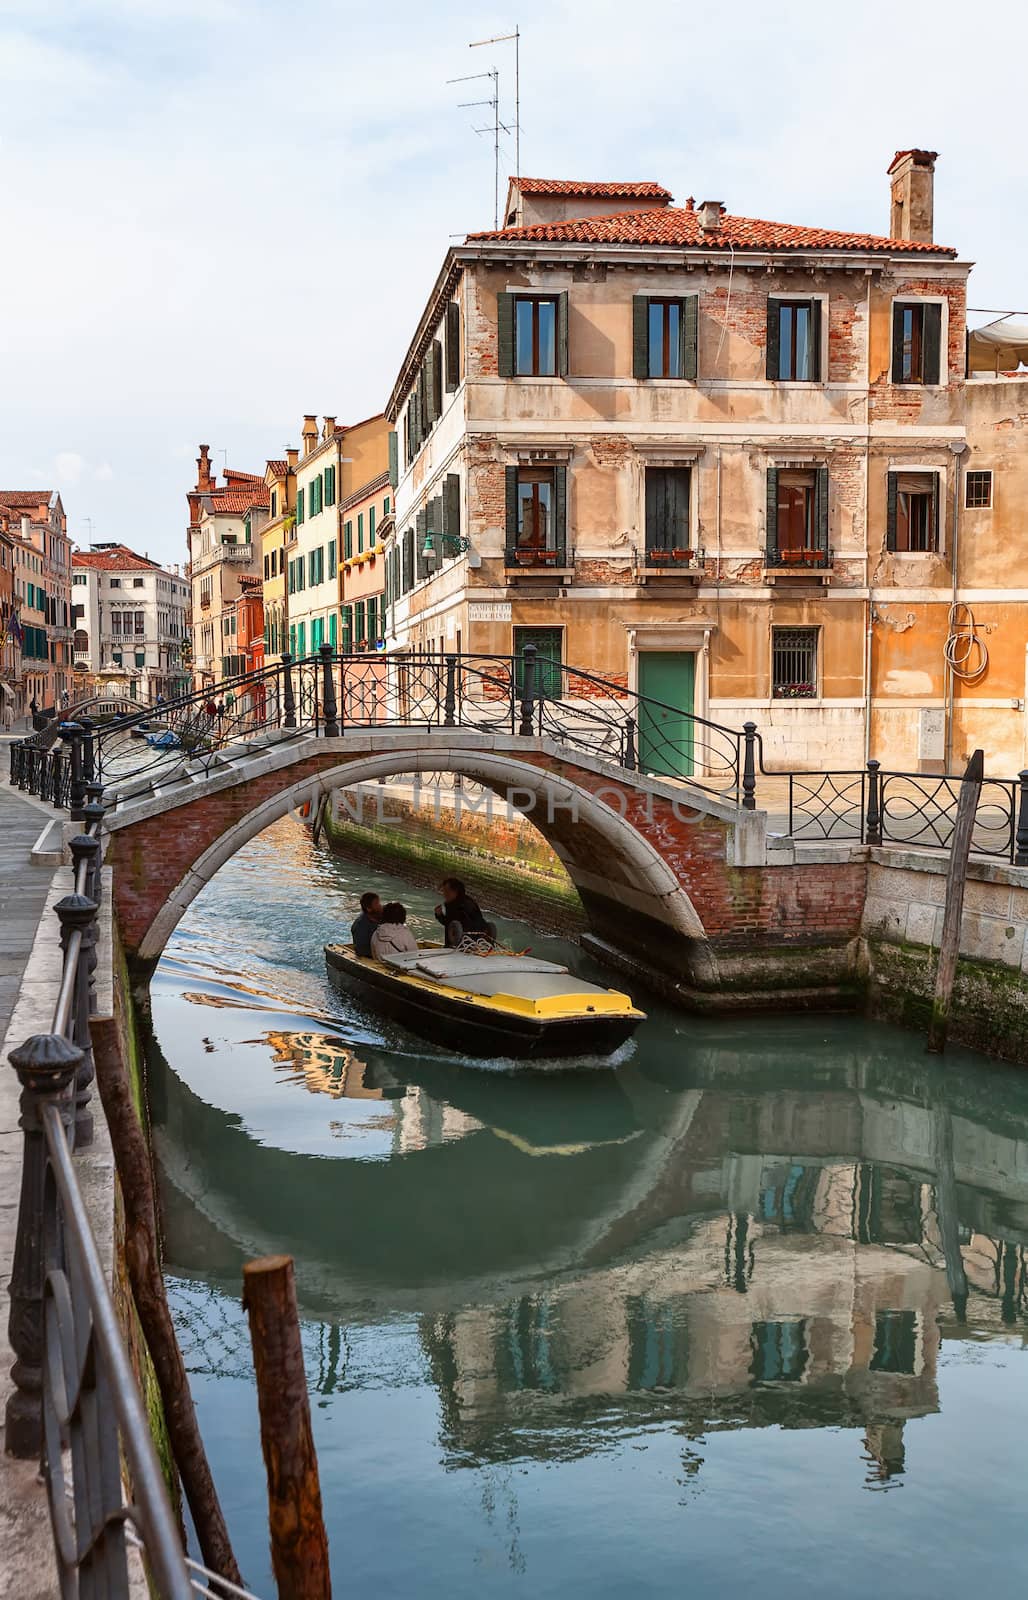 Postcard from Italy.Venice - Exquisite antique buildings along Canals.